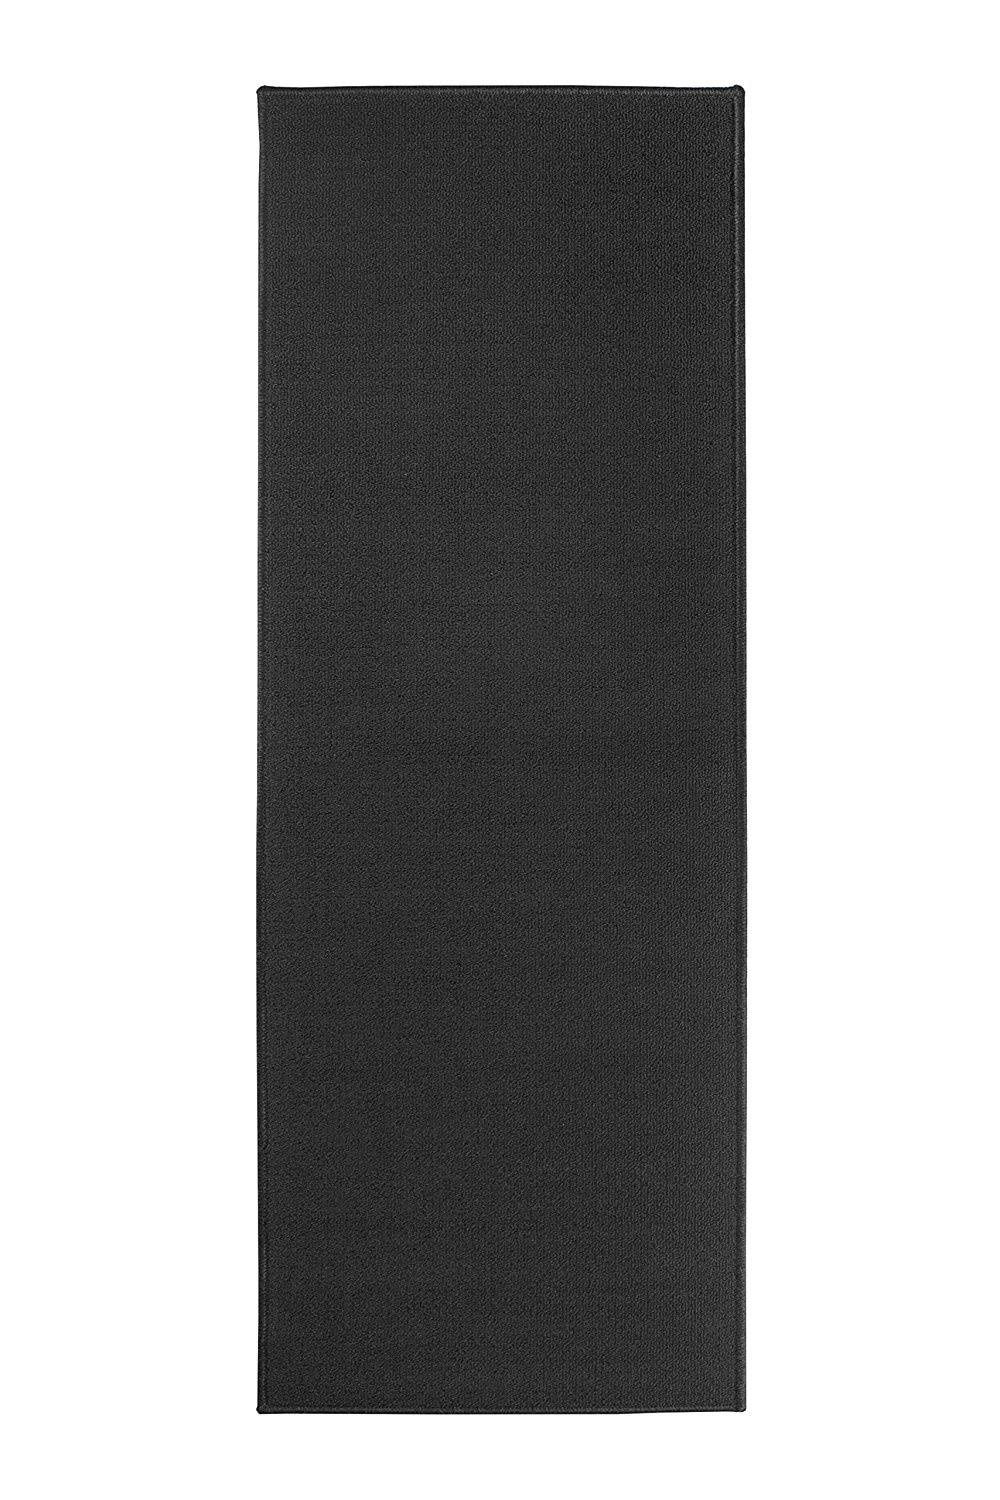 Ritz Accent Door Rug Runner with Non-slip Latex Backing, 50cm by 150cm Kitchen & Bathroom Runner Rug, Black | Decor | Delivery guaranteed